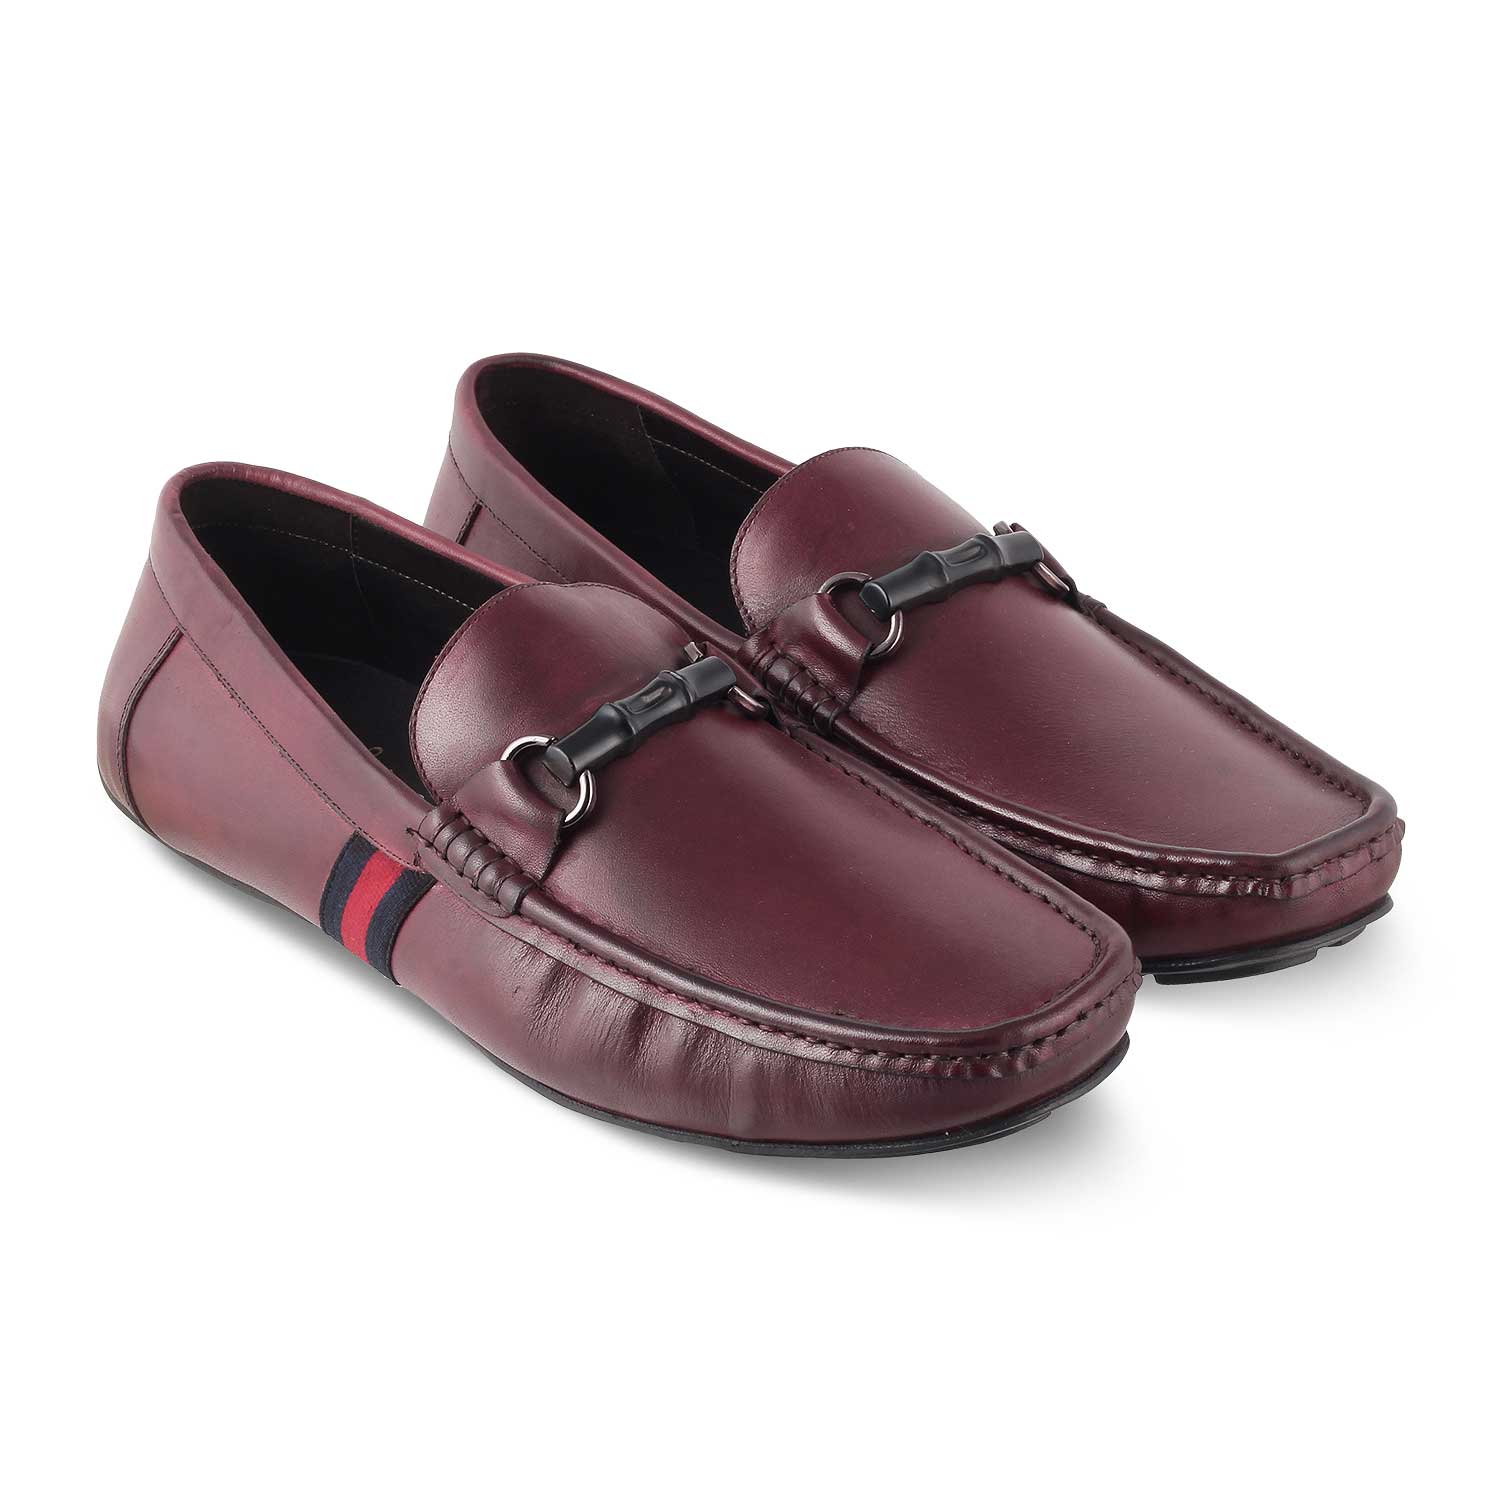 The Monacoa Wine Men's Handcrafted Leather Driving Loafers Tresmode